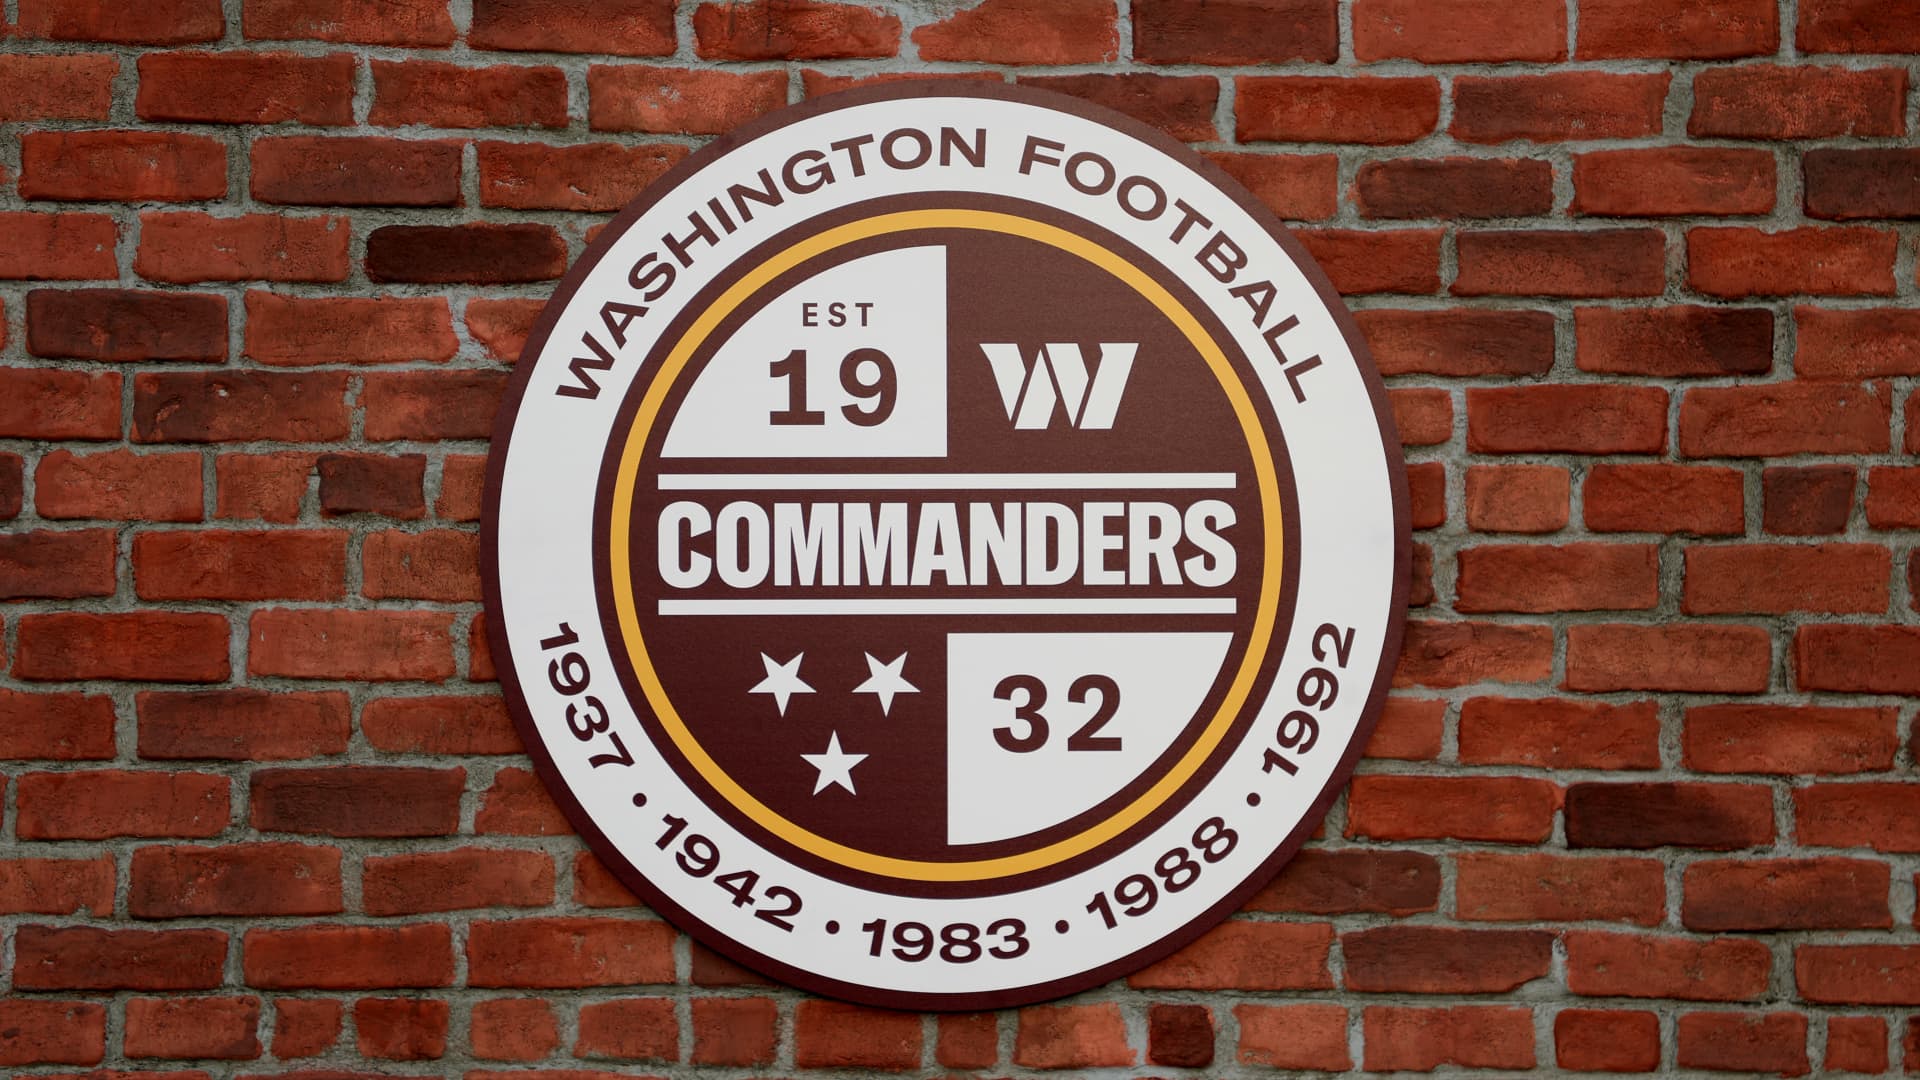 A detailed view of a Washington Commanders logo during the announcement of the Washington Football Team's name change to the Washington Commanders at FedExField on February 02, 2022 in Landover, Maryland.